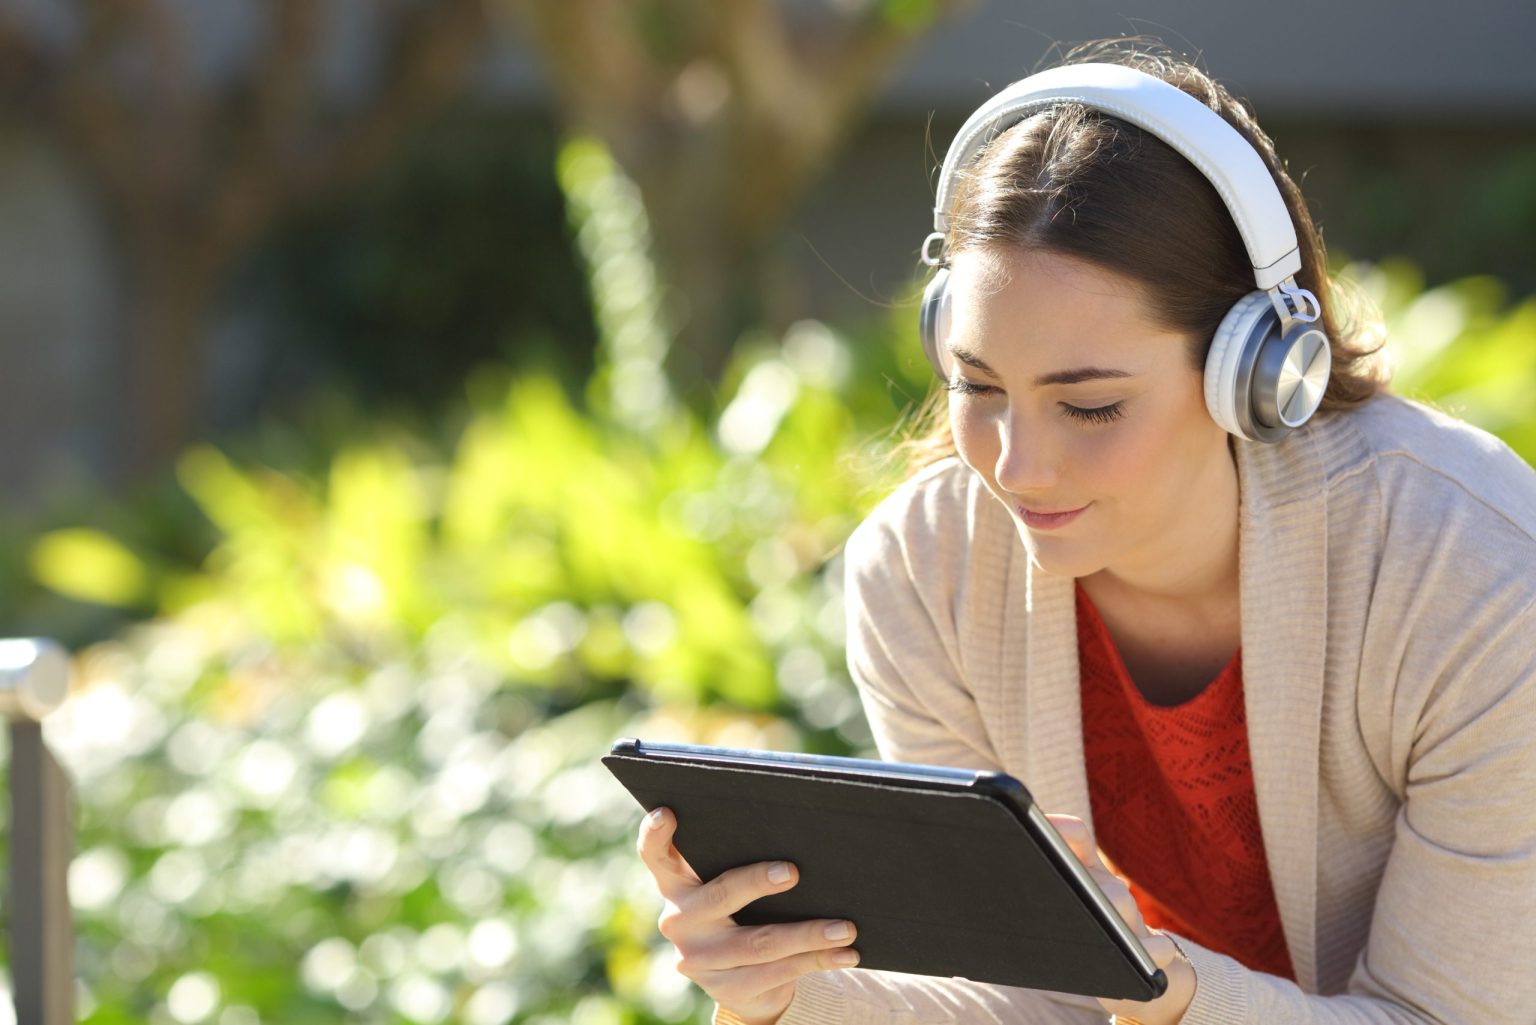 Woman sitting outside with headphones on, reading a tablet and smiling.